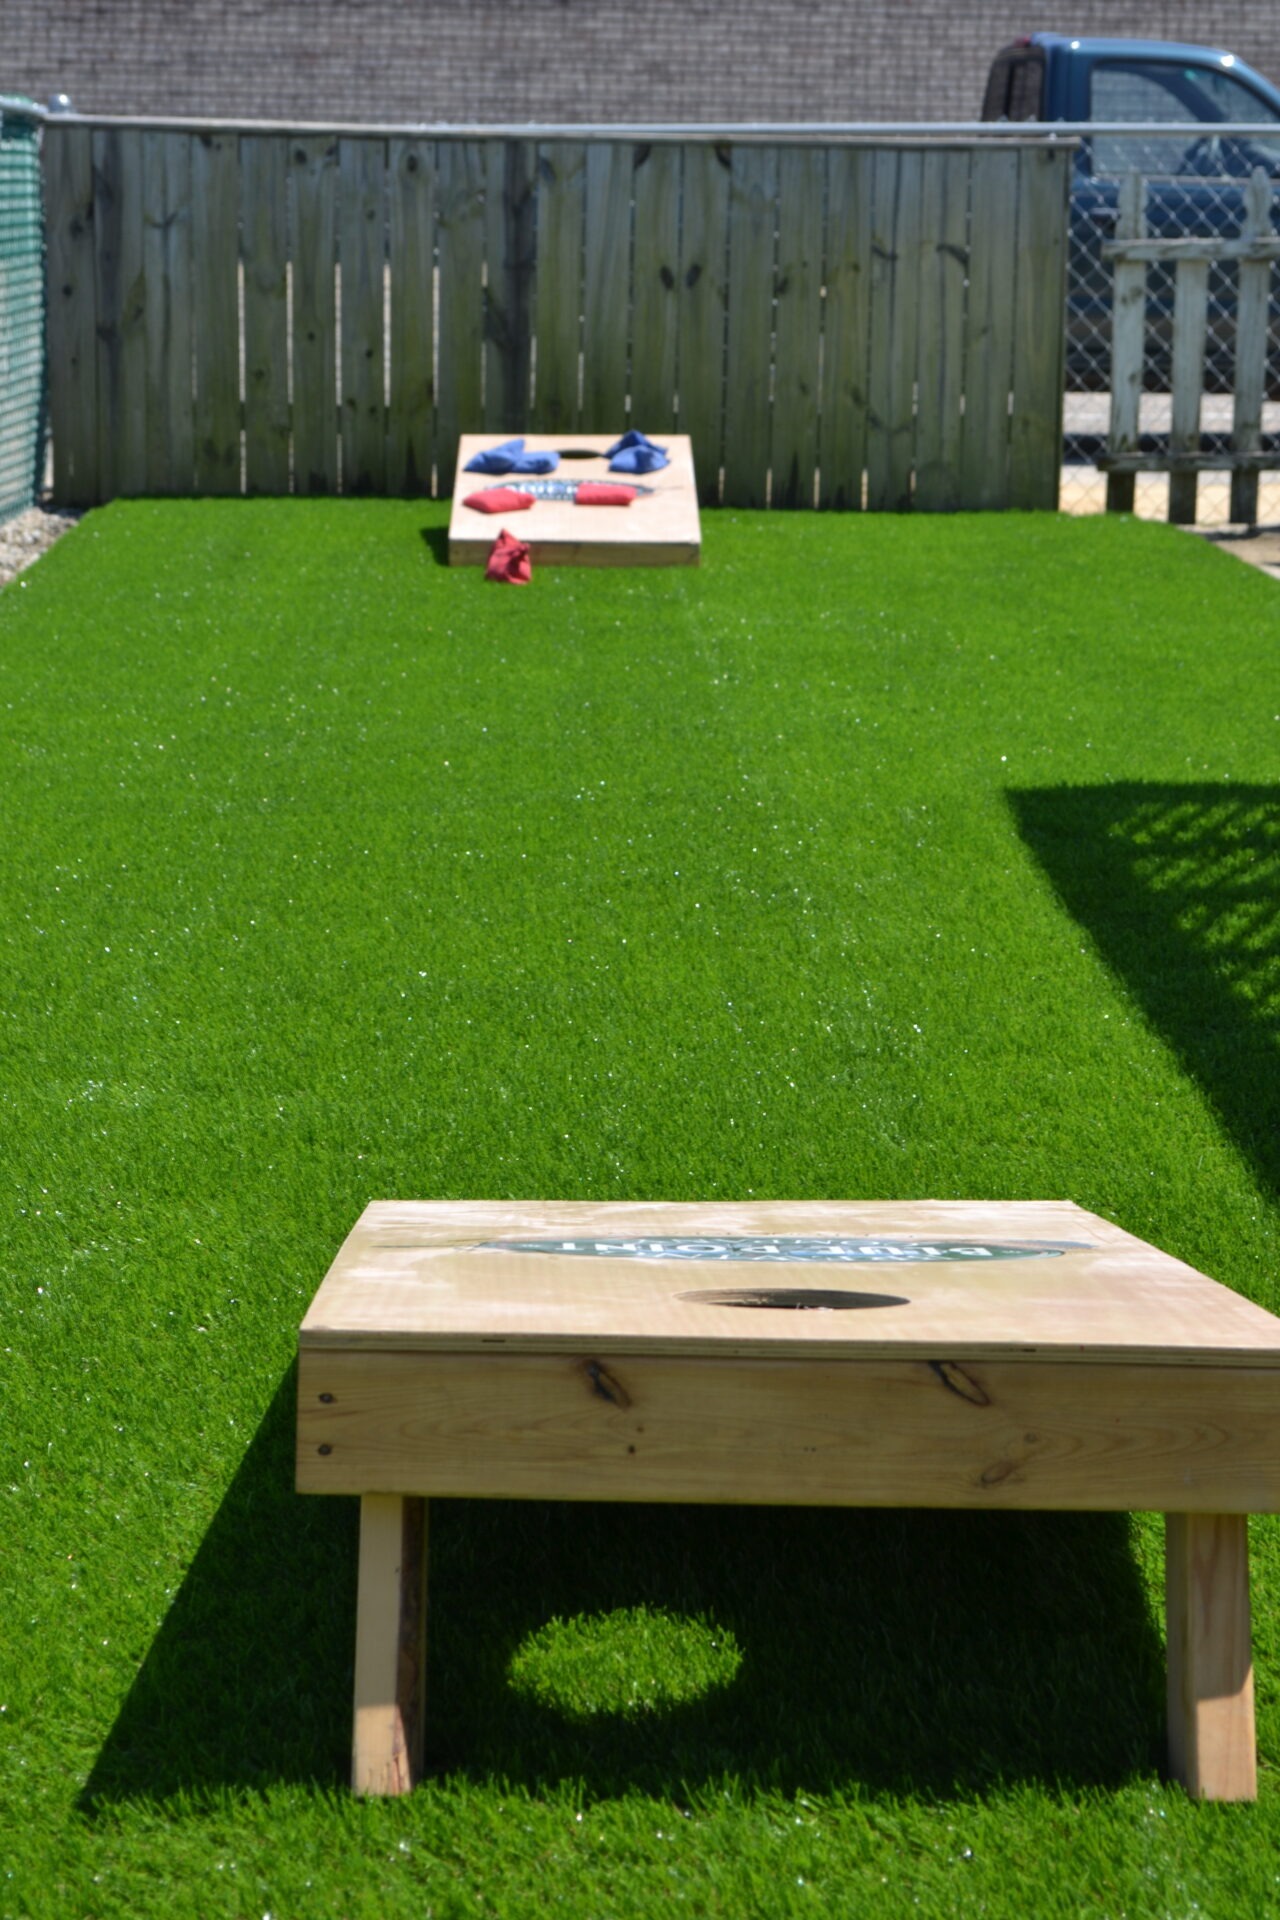 Two wooden cornhole game boards with red and blue bean bags are set up on artificial grass in a fenced backyard on a sunny day.